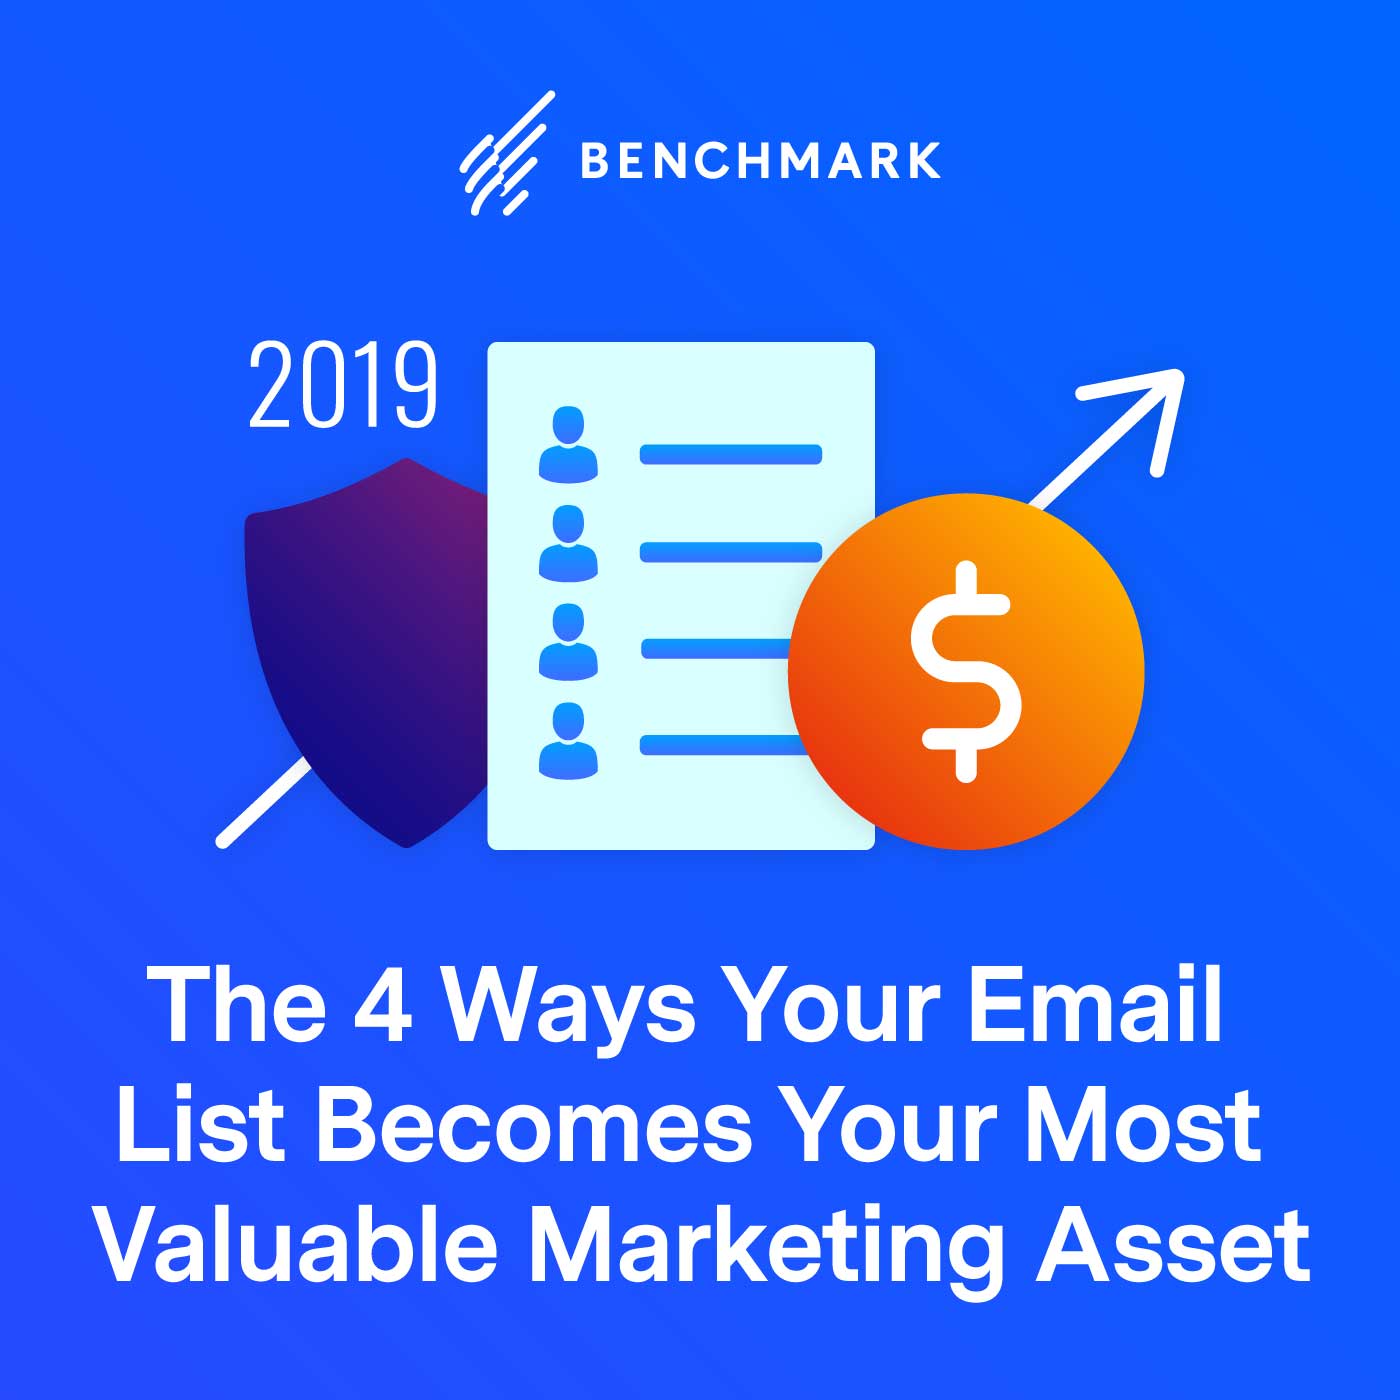 The 4 Ways Your Email List Becomes Your Most Valuable Marketing Asset